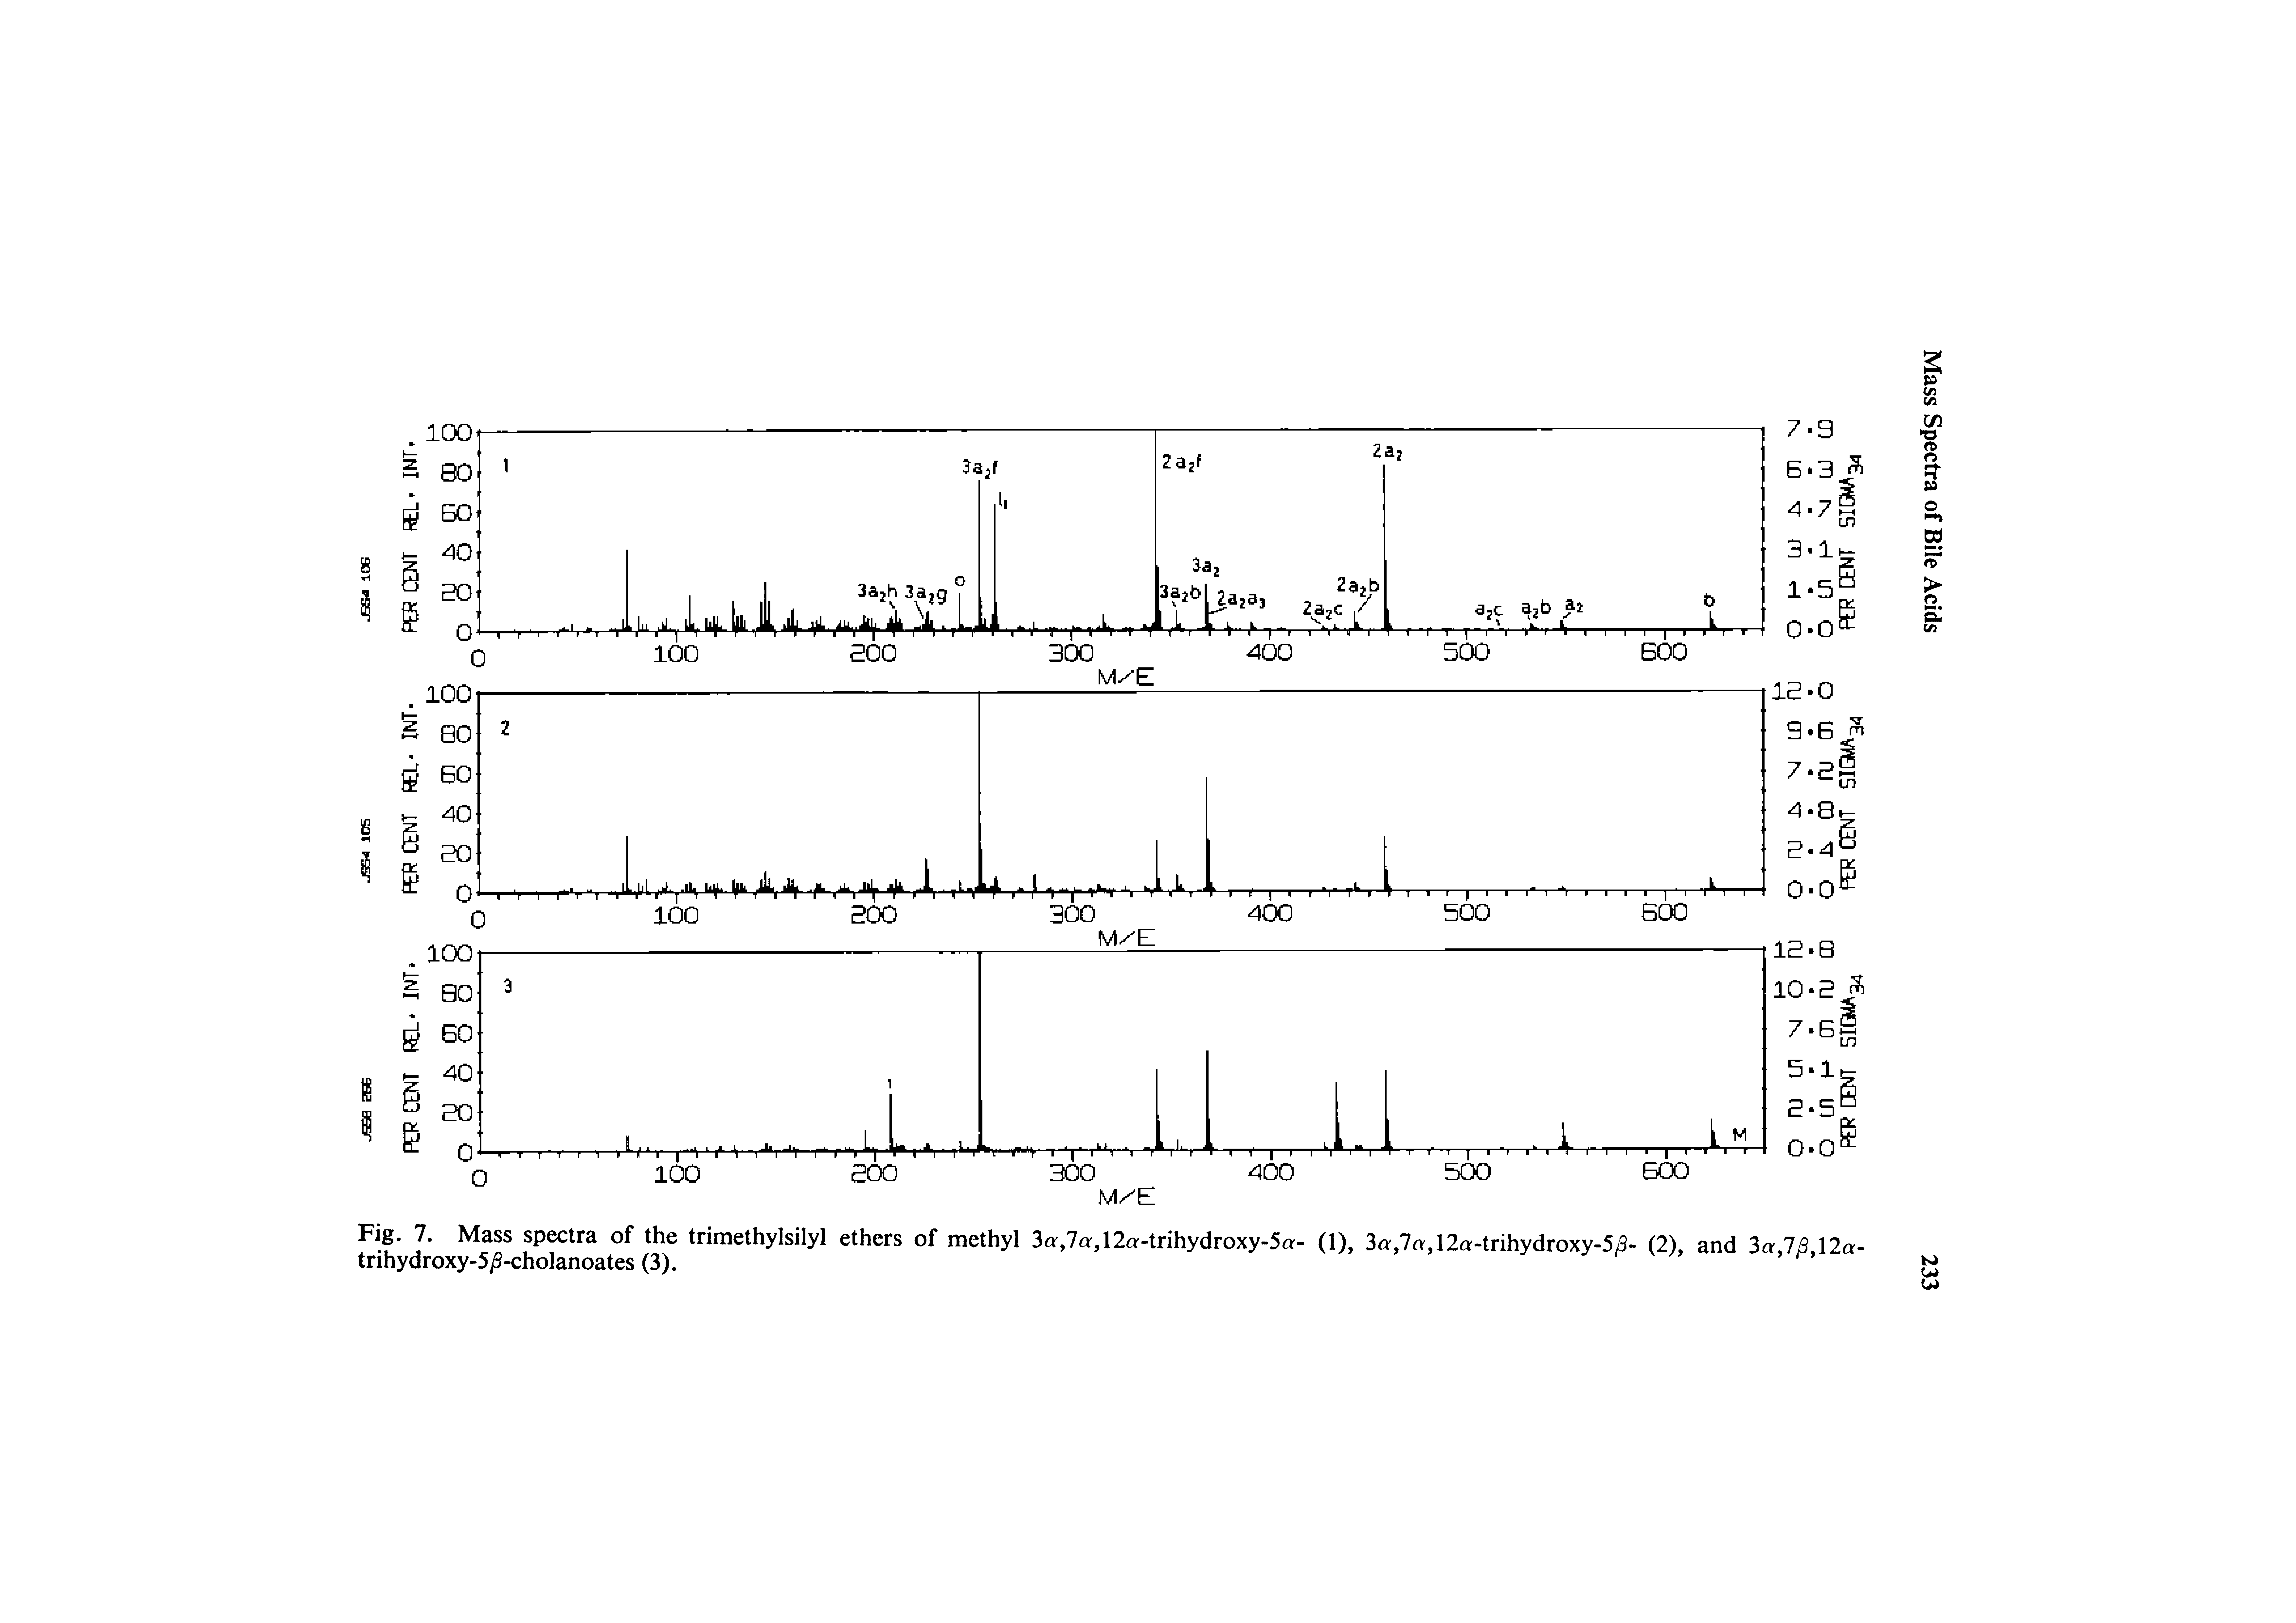 Fig. 7. Mass spectra of the trimethylsilyl ethers of methyl 3a,7a,12a-trihydroxy-5a- (1), 3a,7a,12a-trihydroxy-5/3- (2), and 3a J8 12a-tnhydroxy-5iS-cholanoates (3).